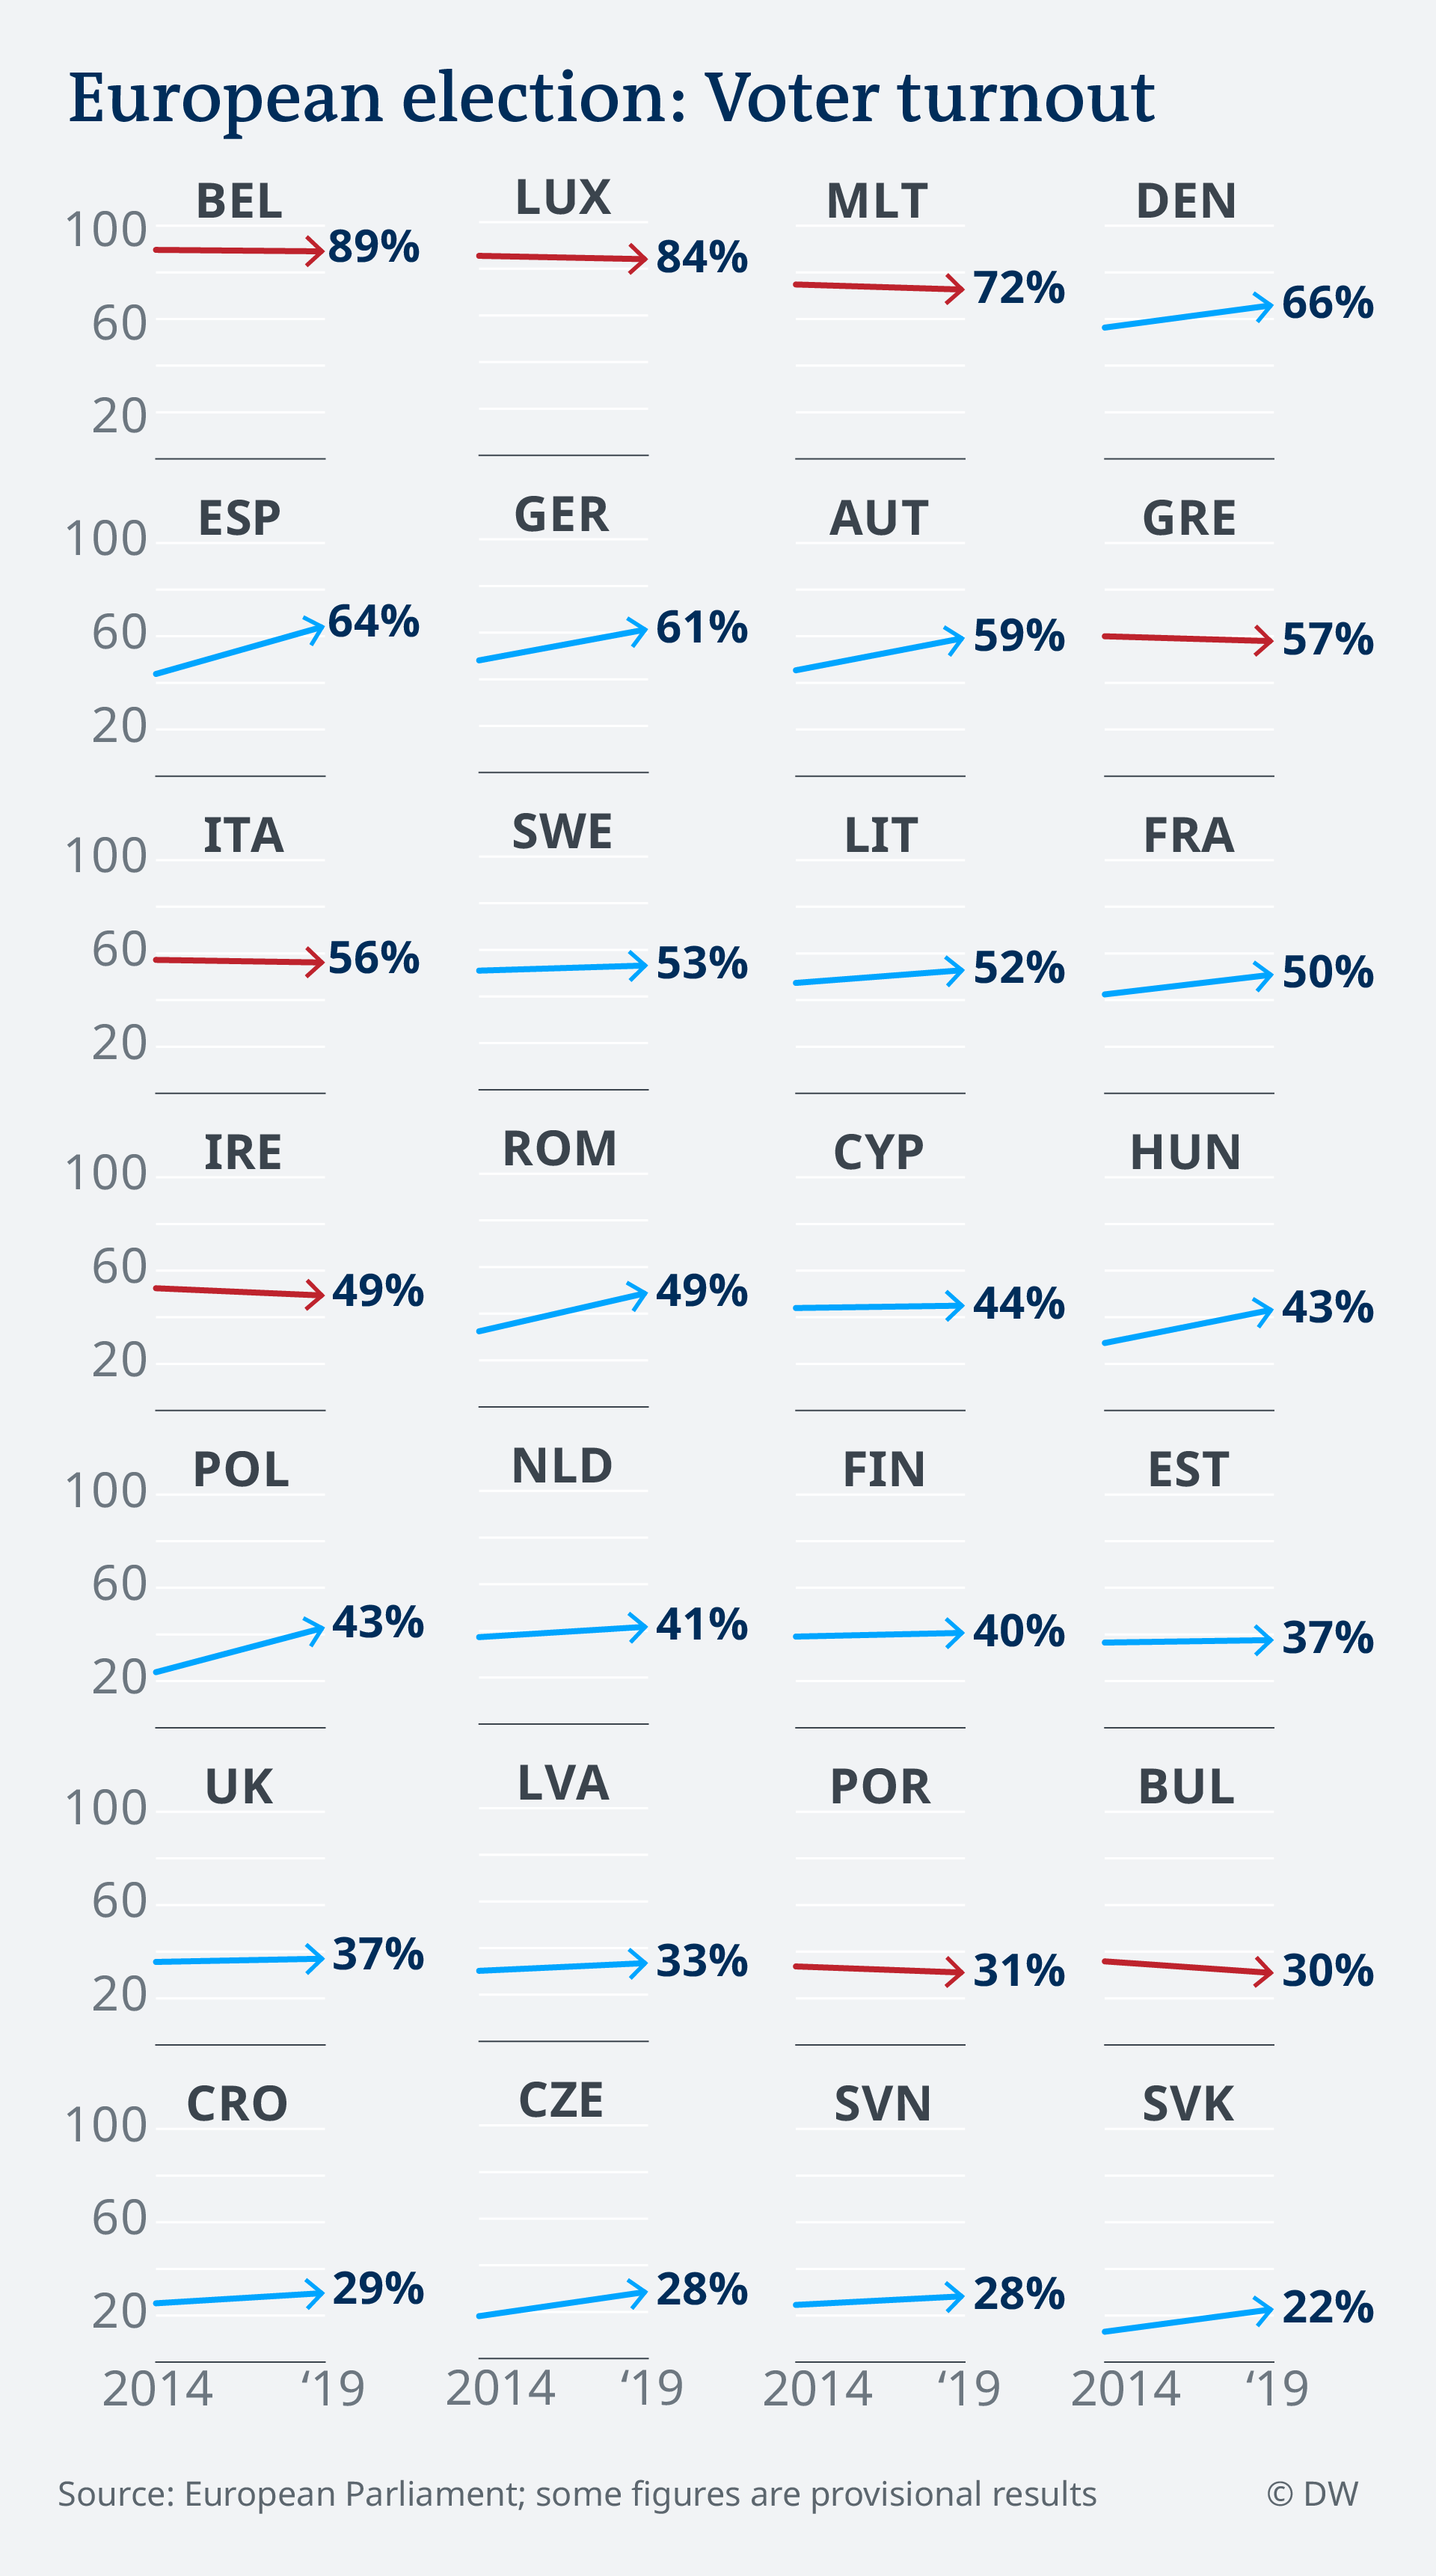 Data visualization Voter Turnout European Election 2019 vs 2014 colorcoded